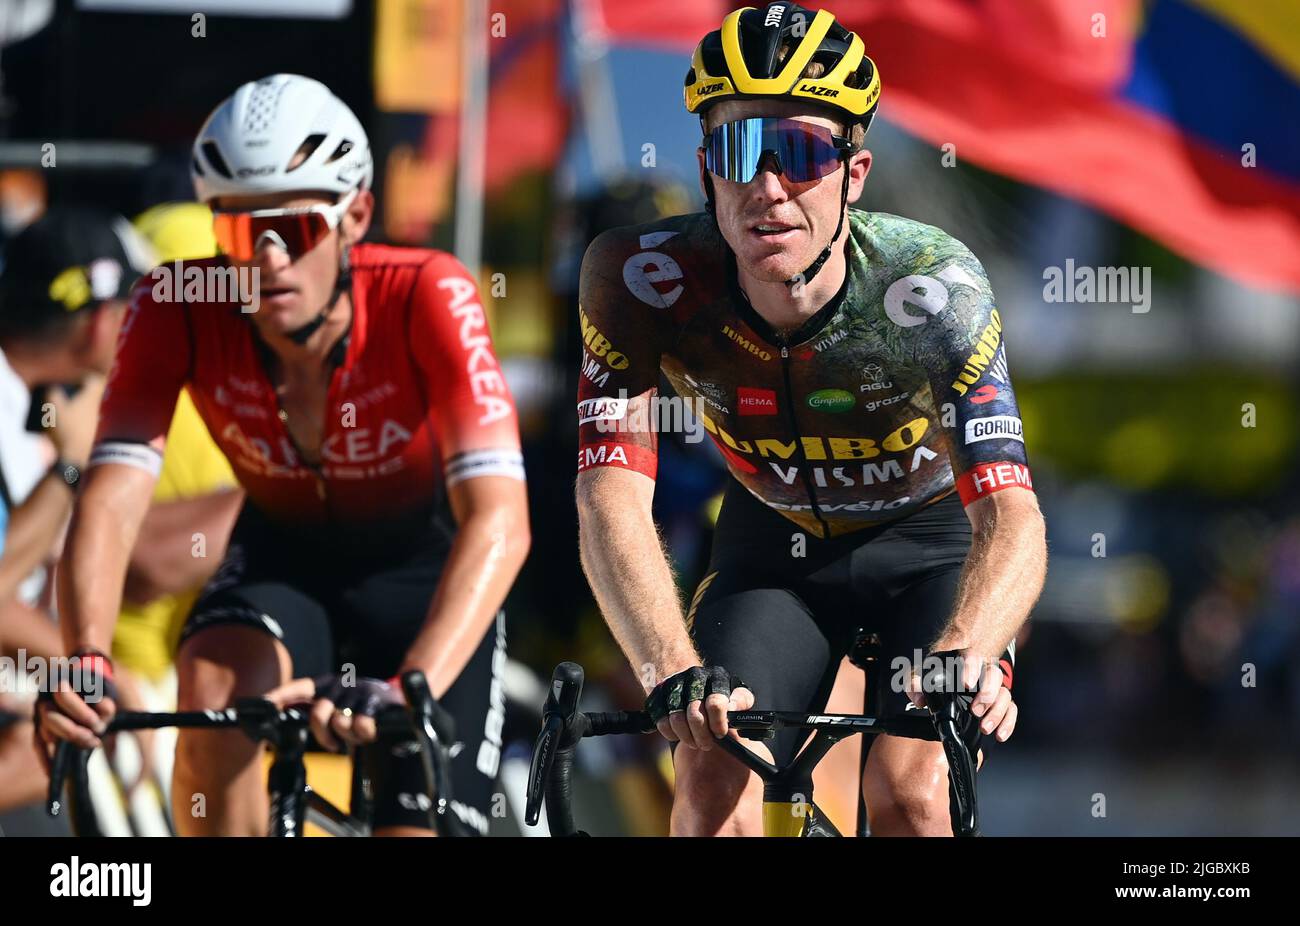 Dutch Steven Kruijswijk of Jumbo-Visma pictured after stage eight of the Tour de France cycling race, a 184km race from Dole, France, to Lausanne, Switzerland, on Saturday 09 July 2022. This year's Tour de France takes place from 01 to 24 July 2022. BELGA PHOTO POOL DAVID STOCKMAN - UK OUT Stock Photo